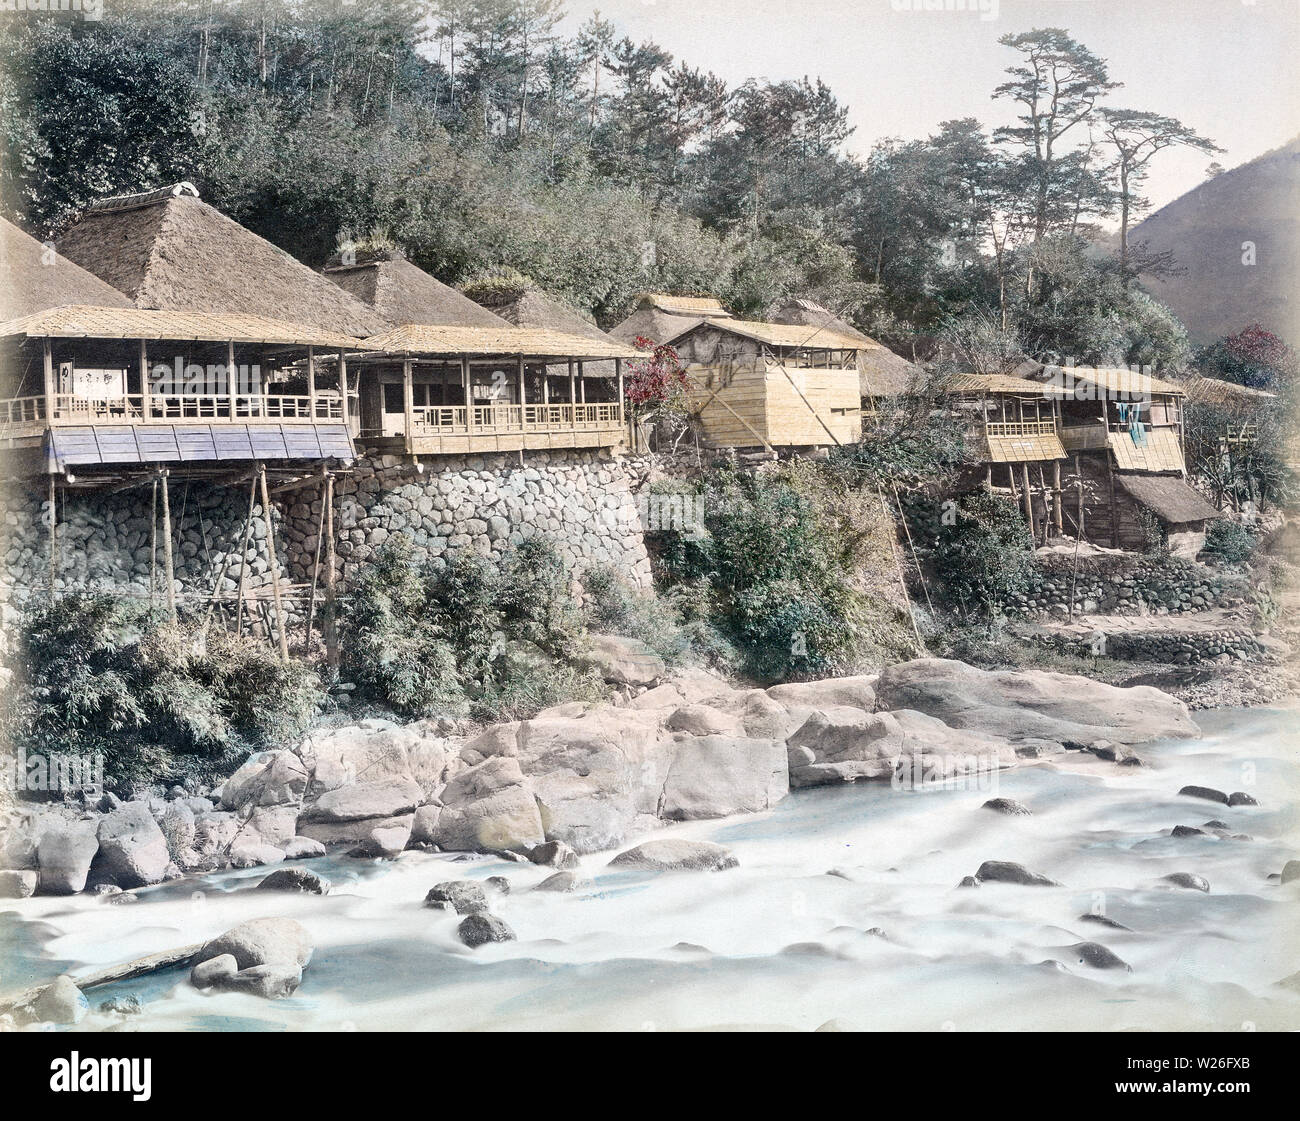 [ 1880s Japan - Japanese Teahouses along a River, Hakone ] —   Teahouses with thatched roofs along the Hayakawa River at Sanmaibashi in Hakone, Kanagawa Prefecture around 1880 (Meiji 13).  19th century vintage albumen photograph. Stock Photo